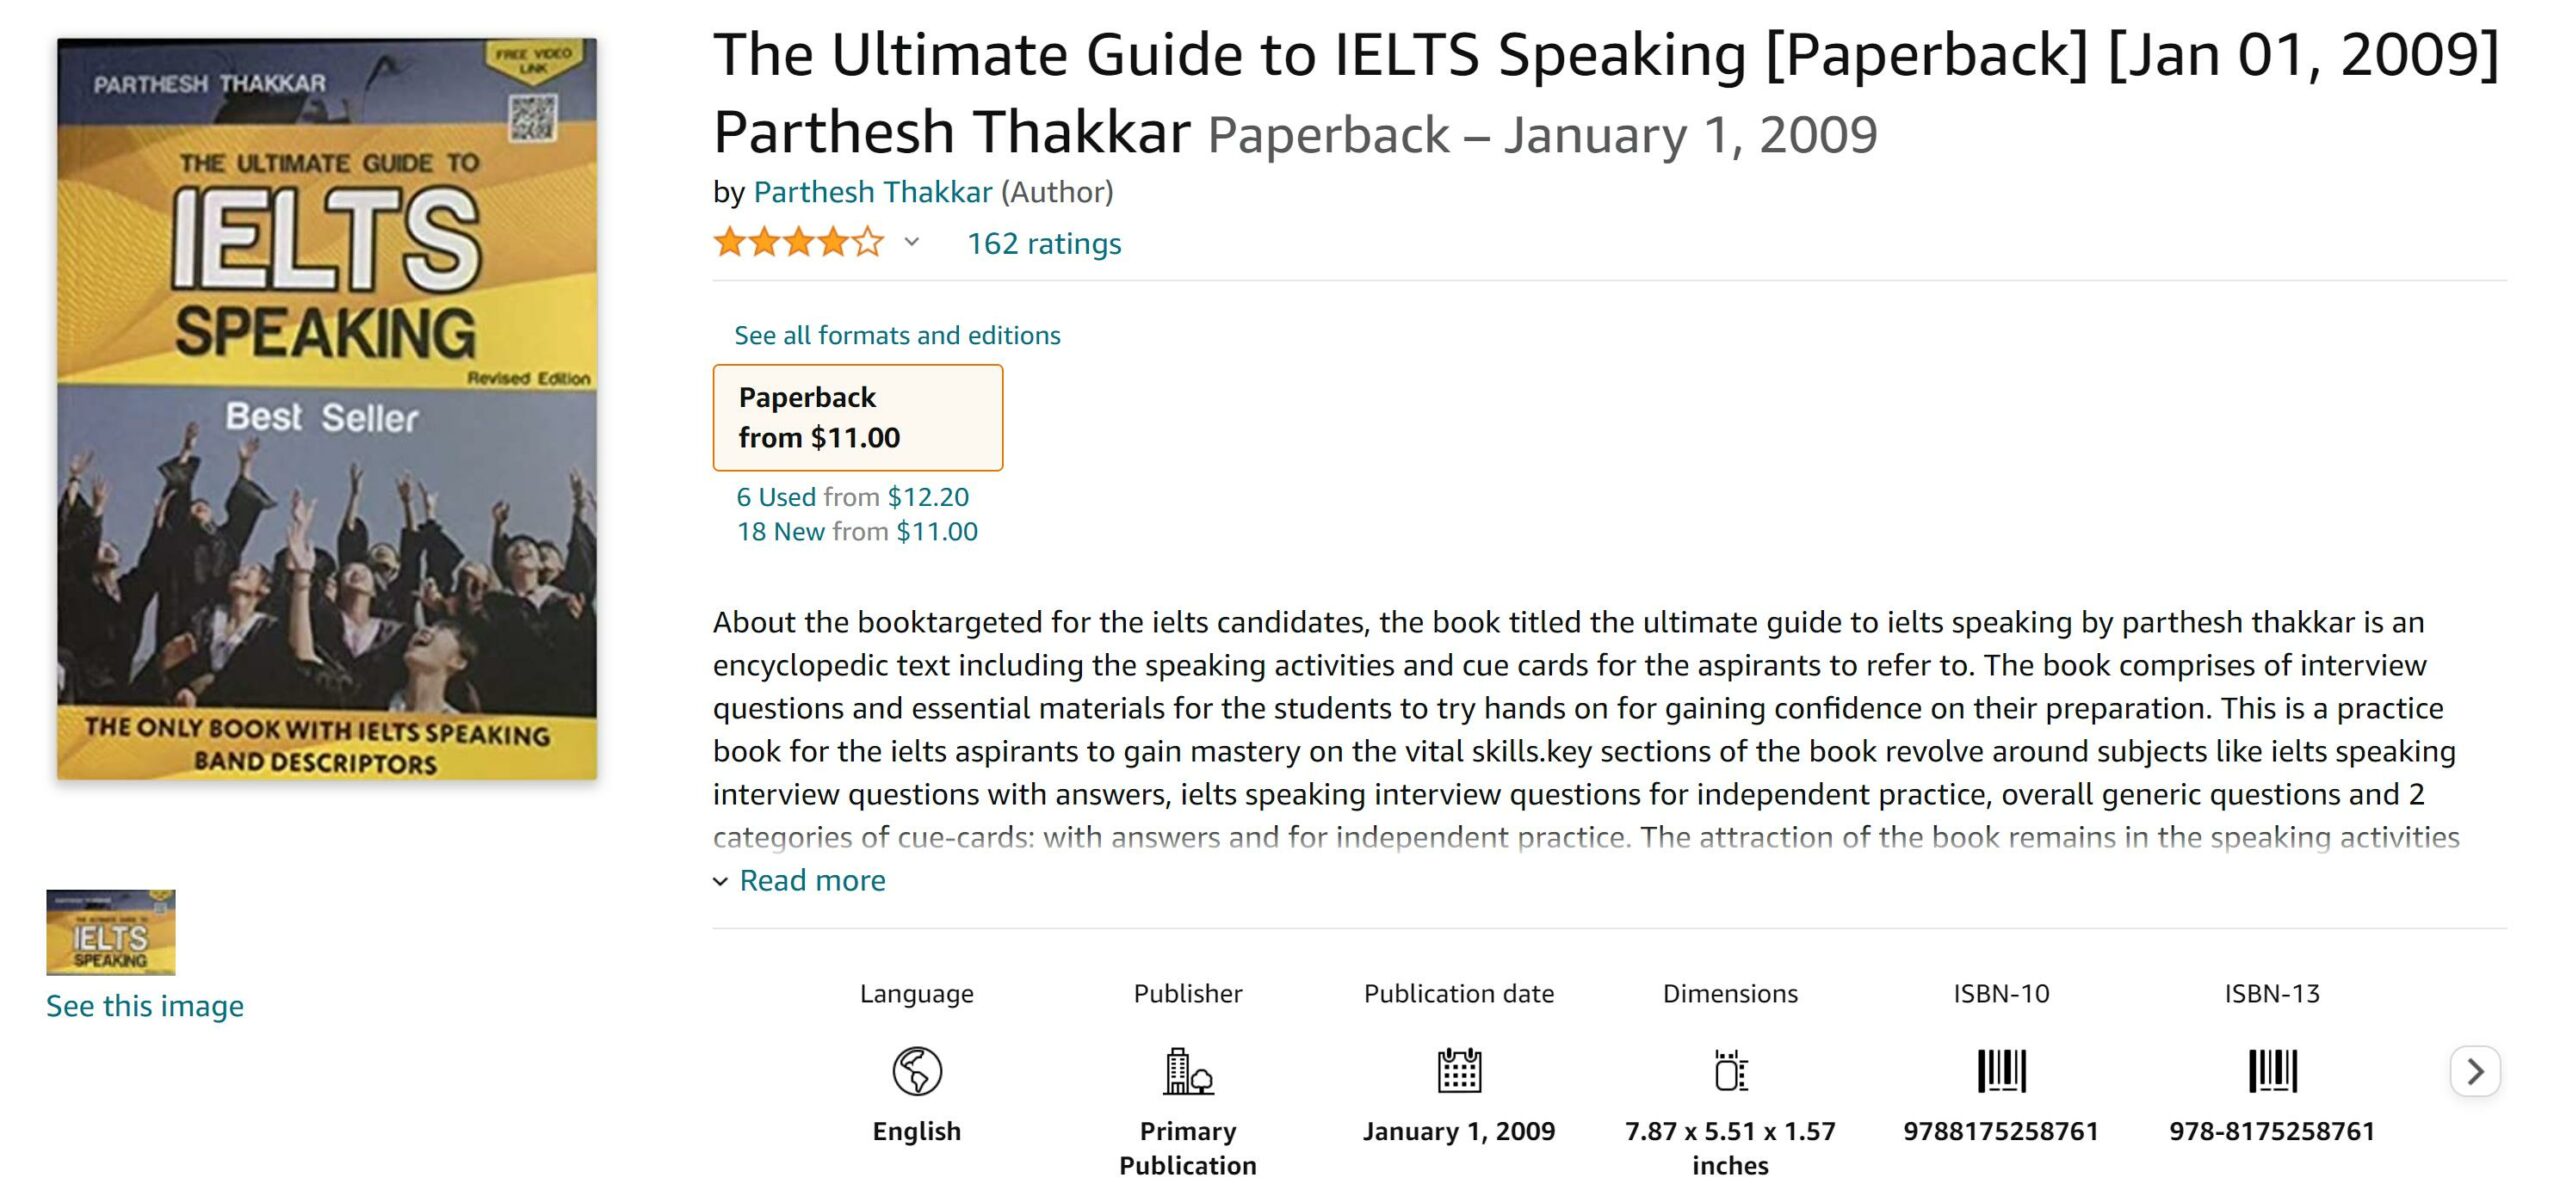 The Ultimate Guide to IELTS Speaking Guide or Book